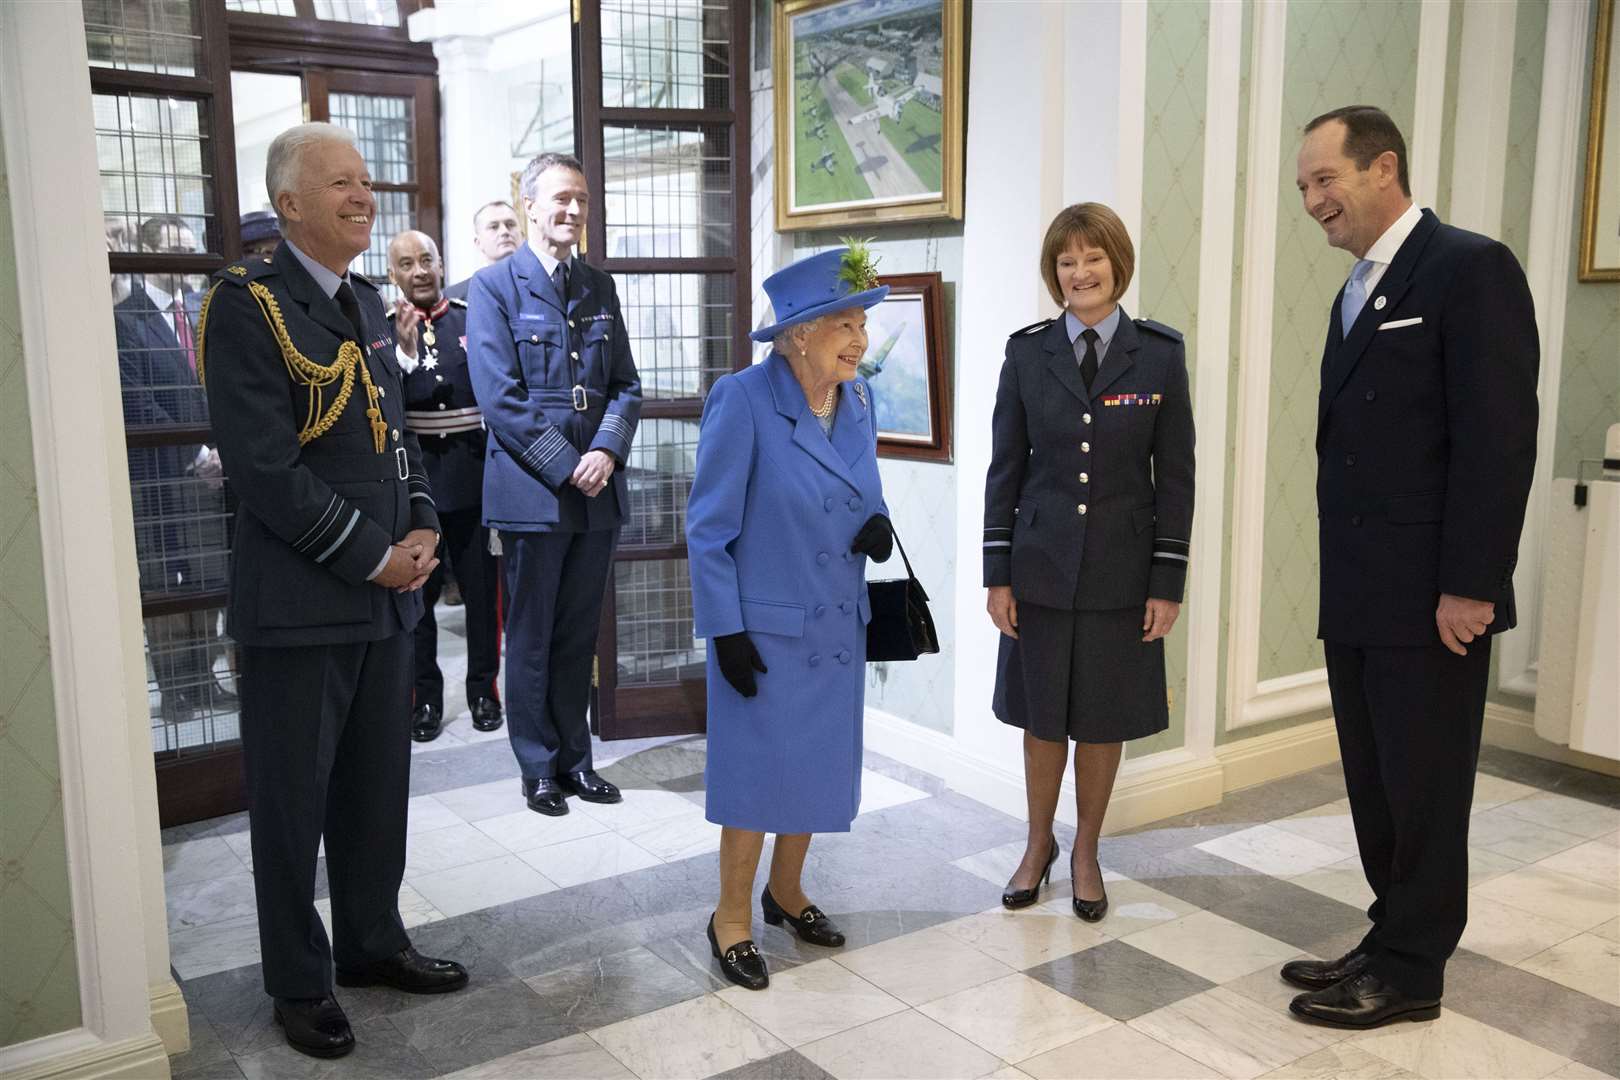 Queen Elizabeth’s 2018 visit to the RAF Club was featured in Charles festive address (Heathcliff O’Malley/Daily Telegraph/PA)